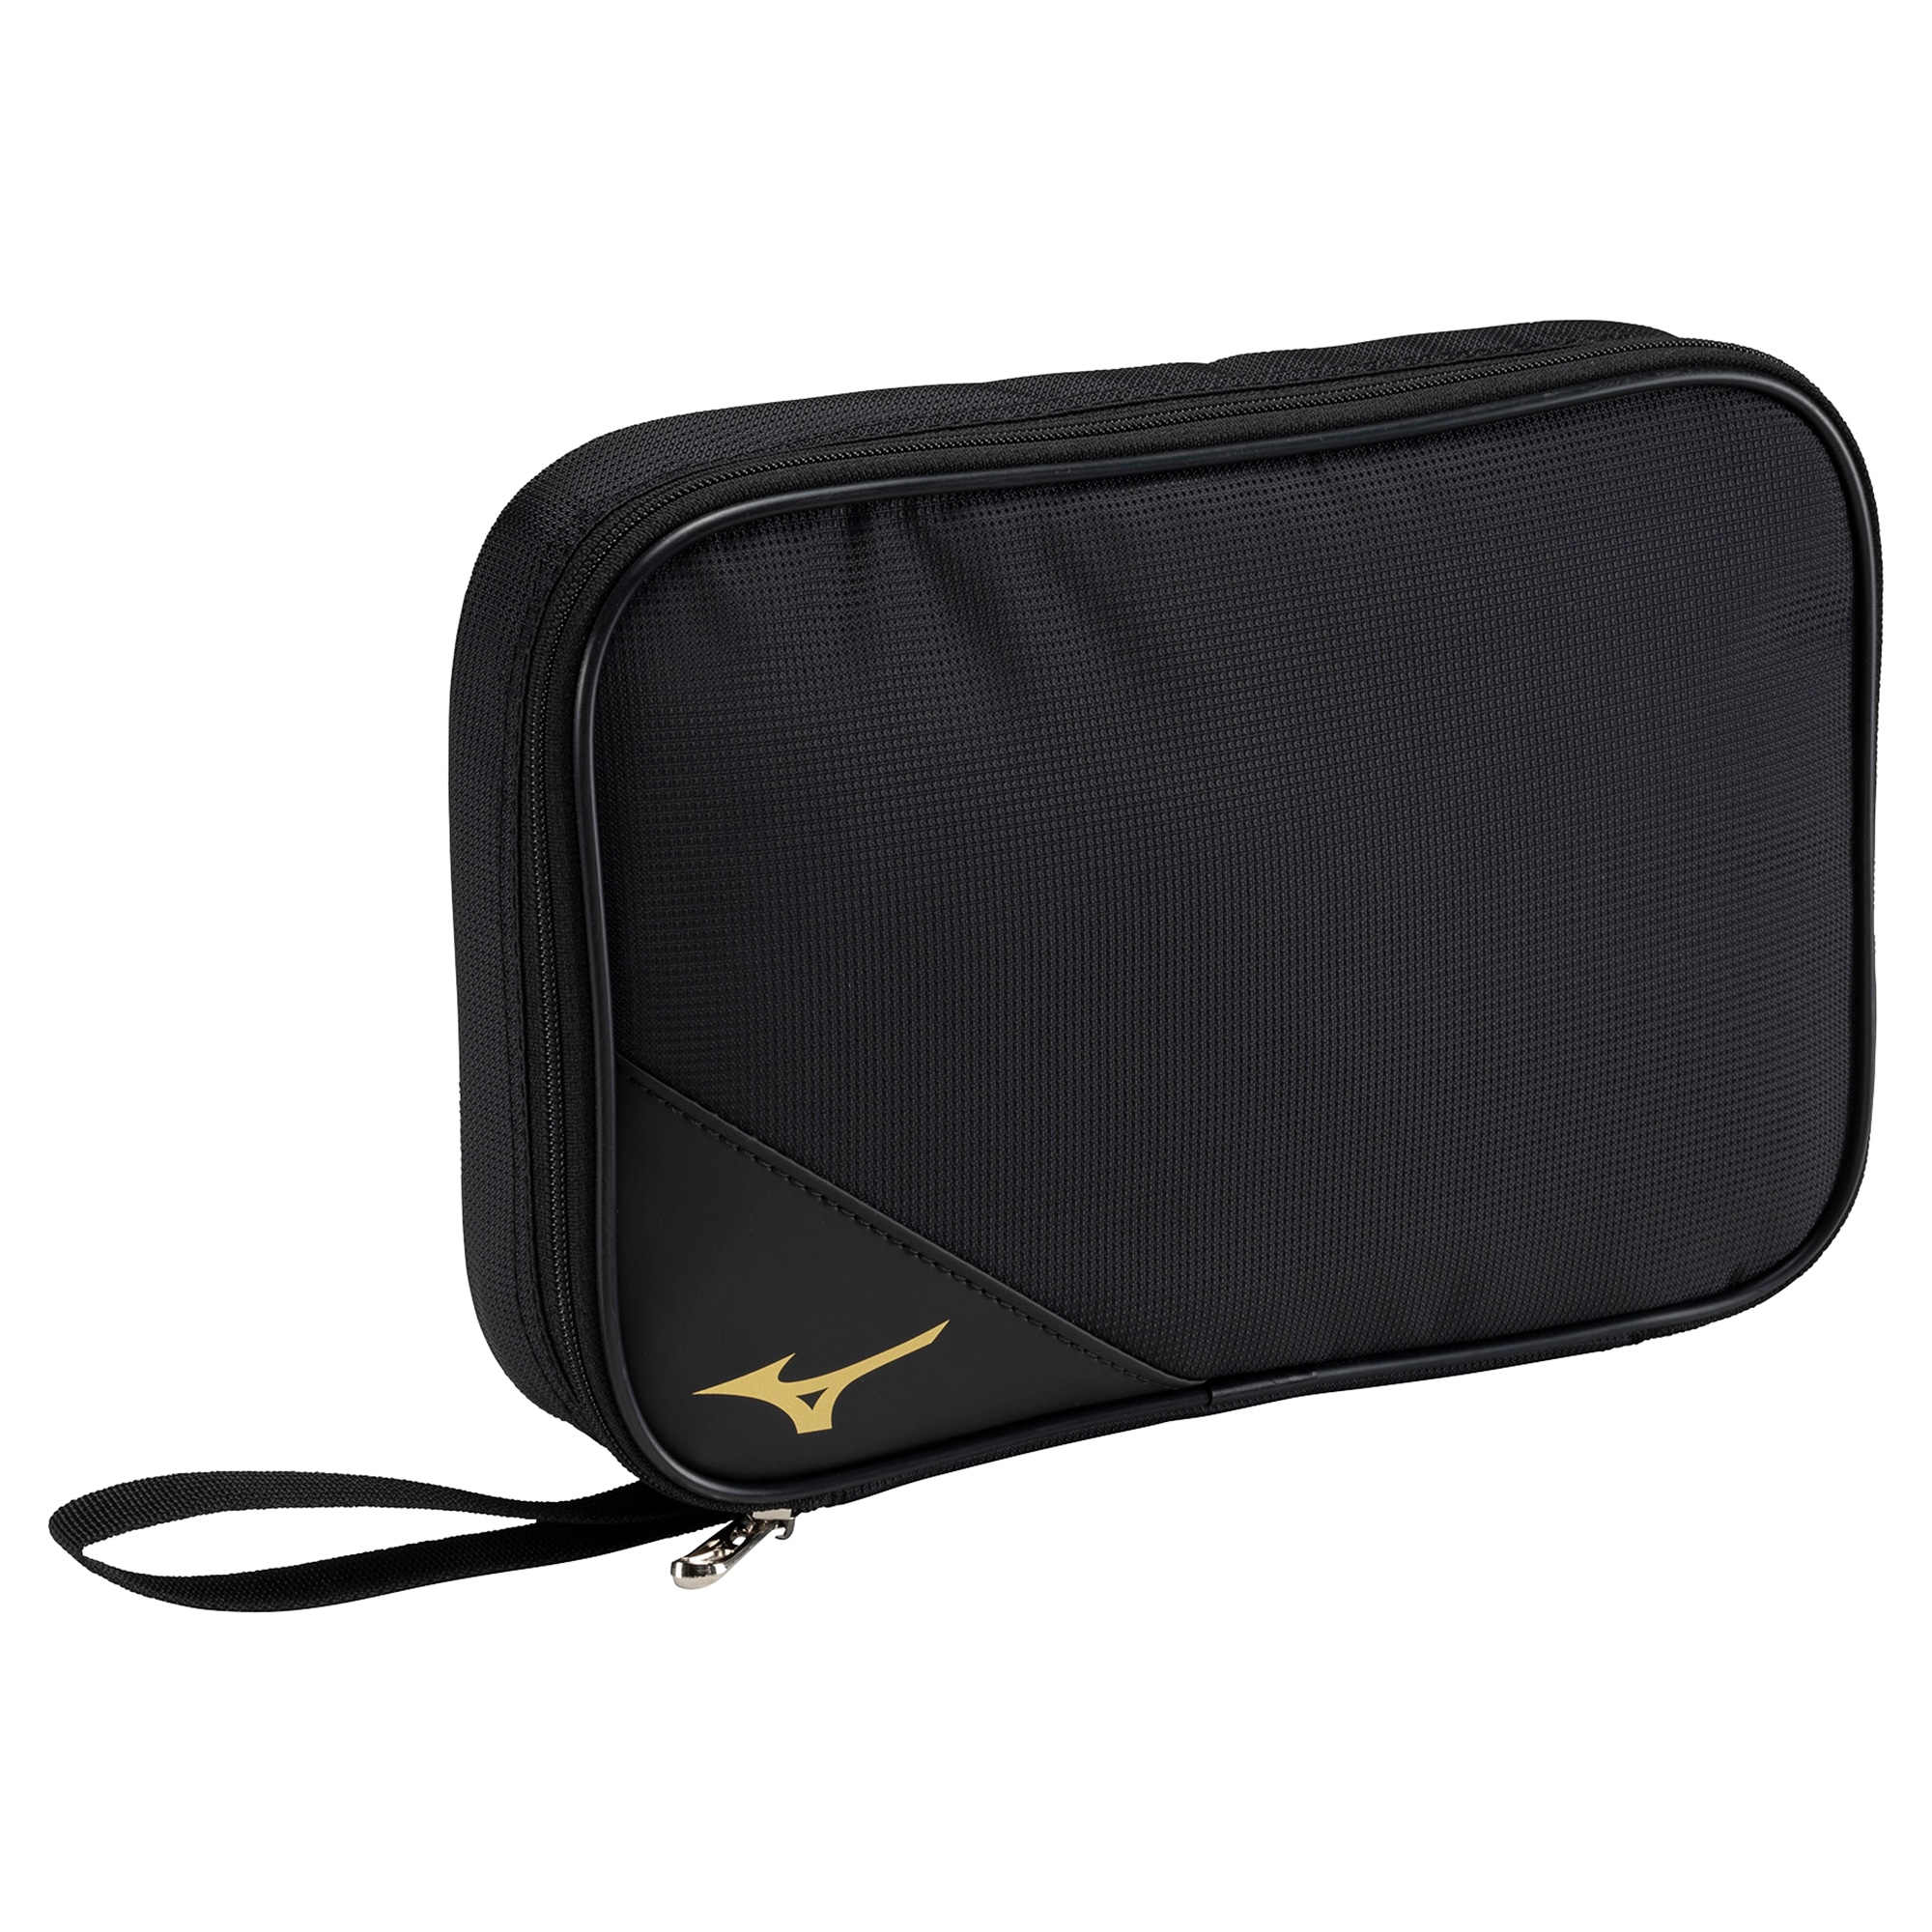 SOFT CASE FOR 2 RACKETS 83JD3510